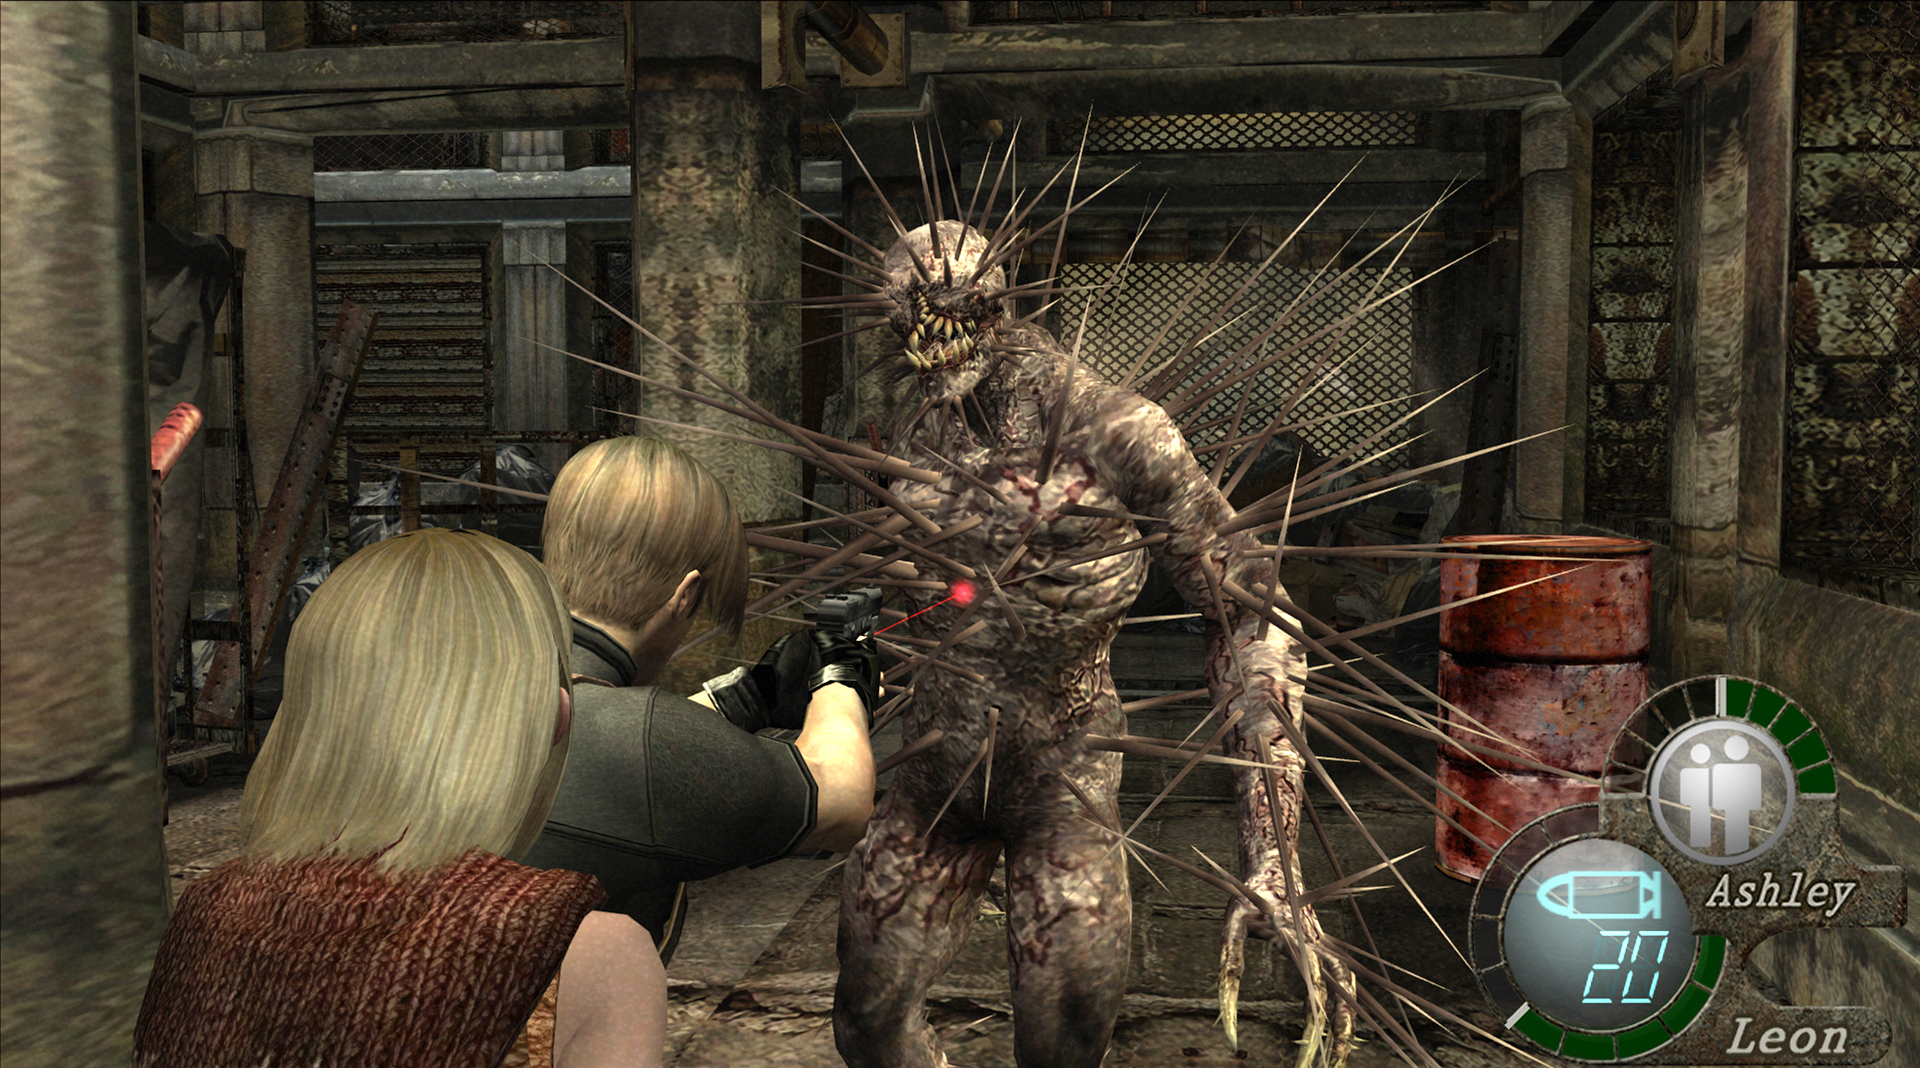 Resident Evil 4 is getting a remake, due out in 2022